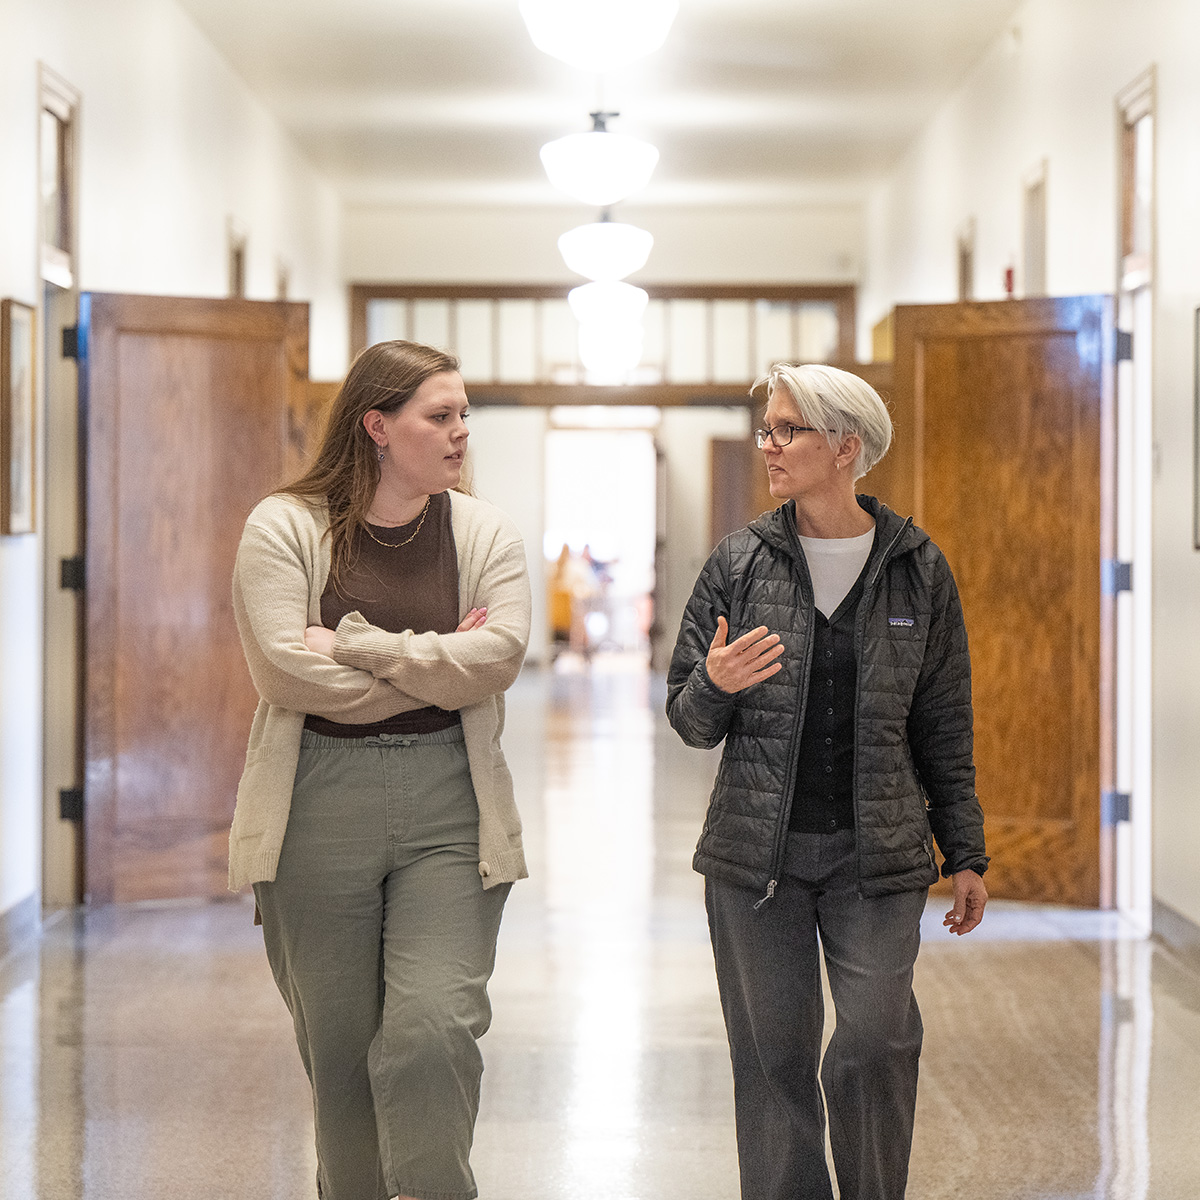 Student and Faculty Member walking side-by-side in the corridor of Asbury Hall